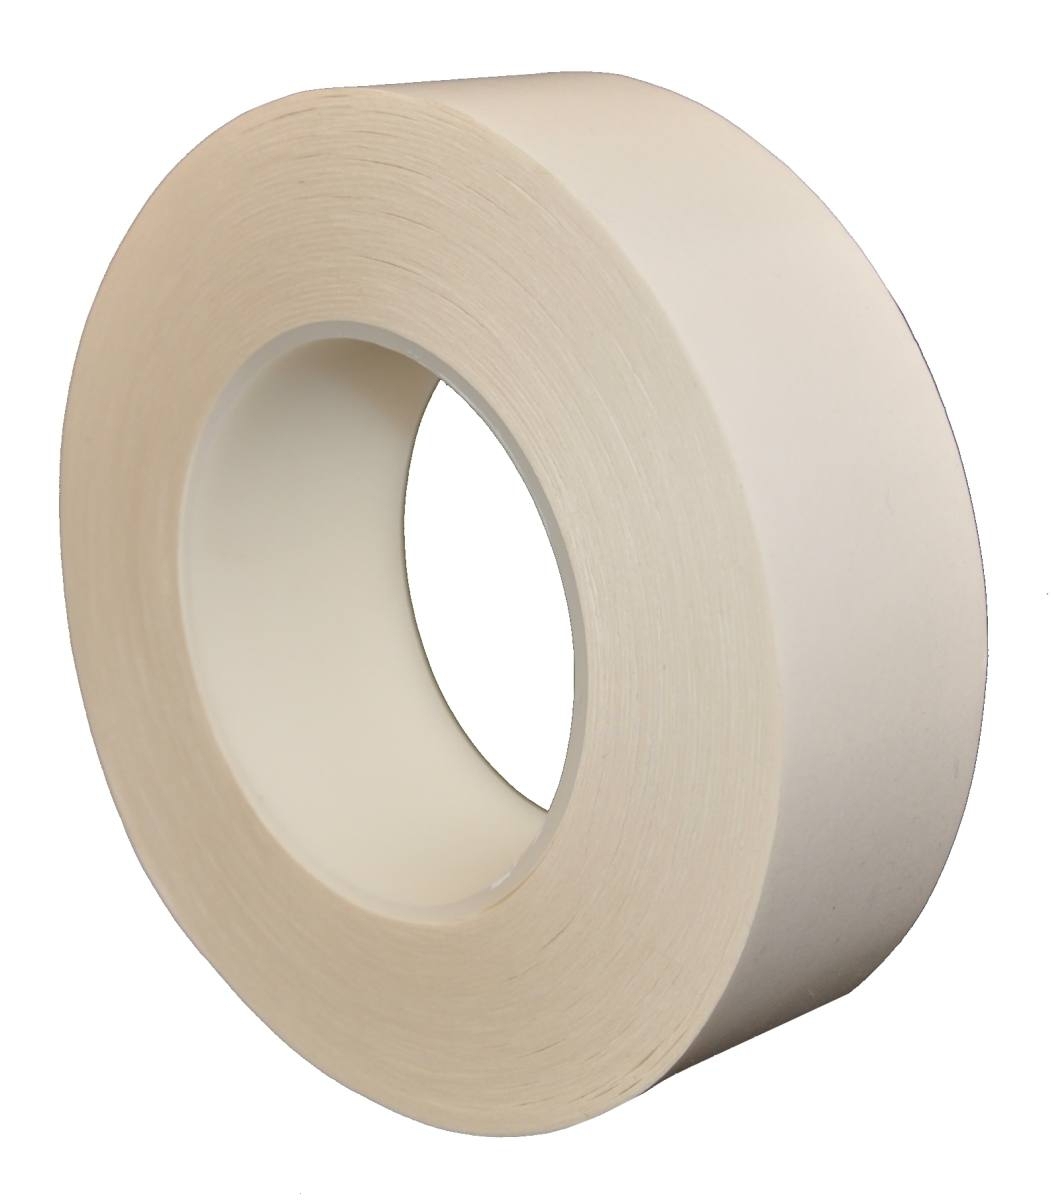 SKS silicone paper release liner, 300mmx150m, coated on both sides with glassine, white